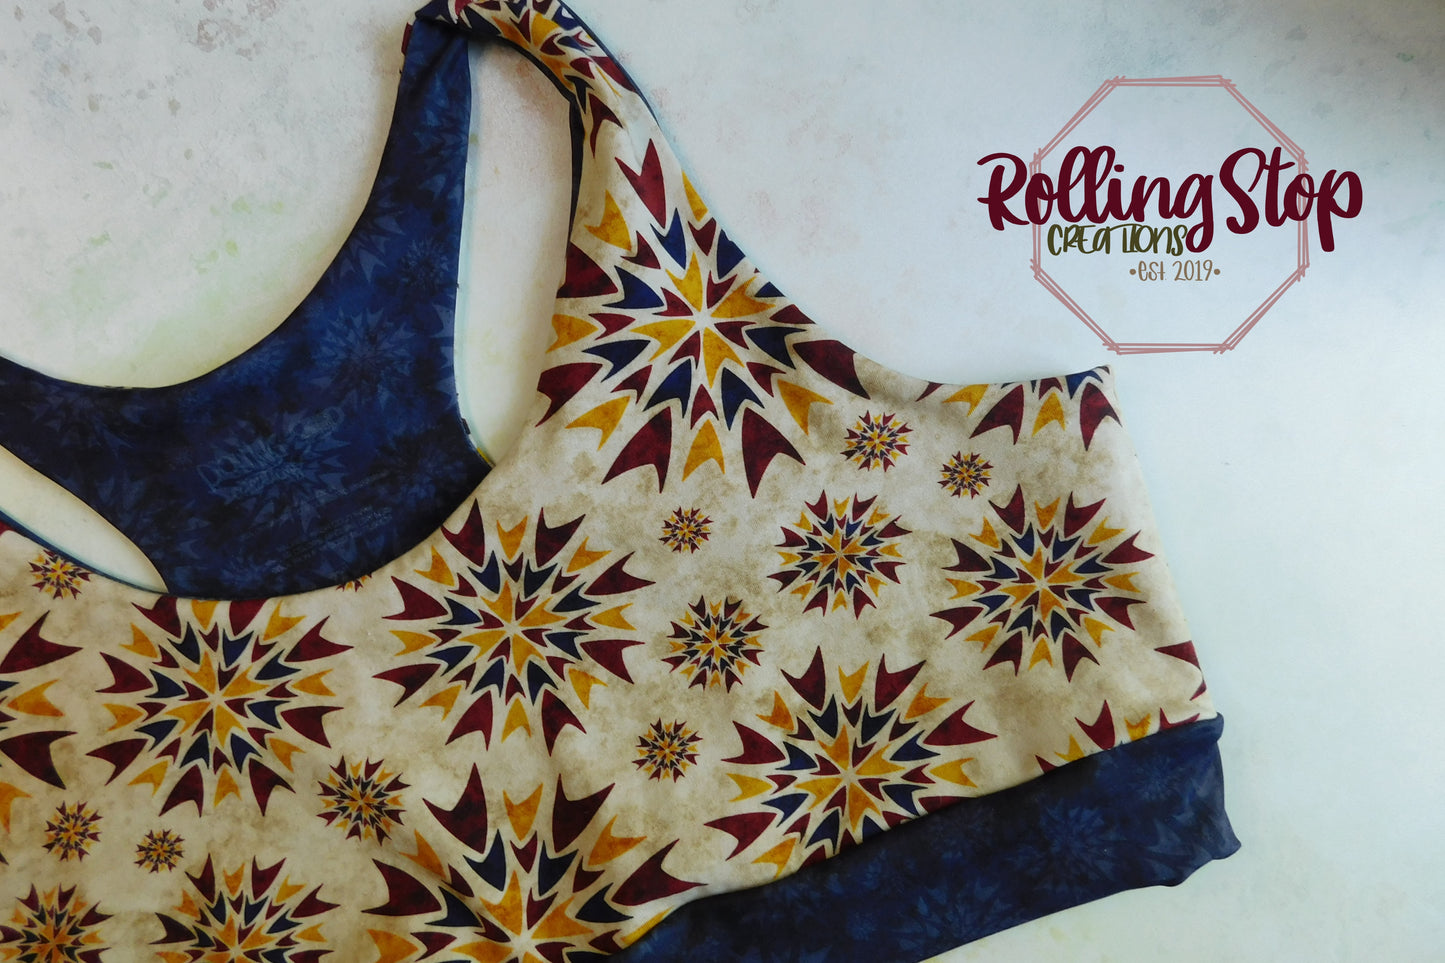 Floral Comm Comfy Bra by Rolling Stop Creations sold by Rolling Stop Creations Accessories - Comfy Bra - Comfy Clothes